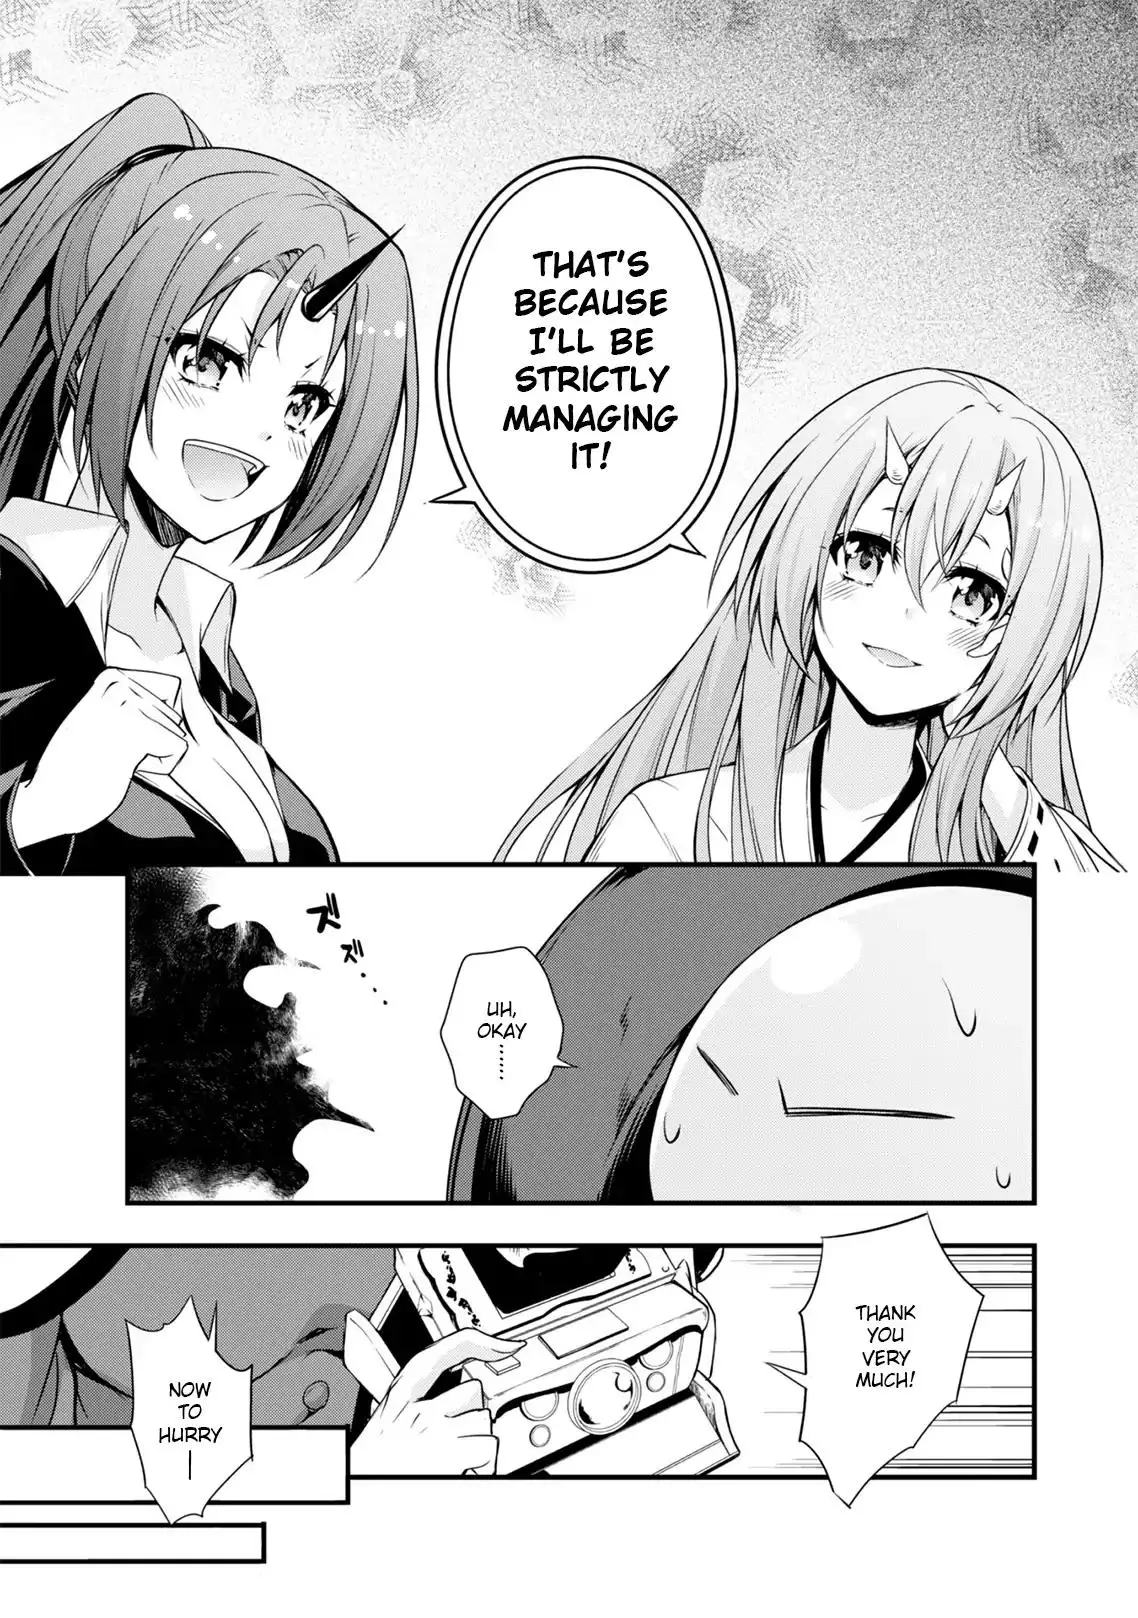 Tensei Shitara Slime Datta Ken: The Ways of Strolling in the Demon Country - 21 page 20